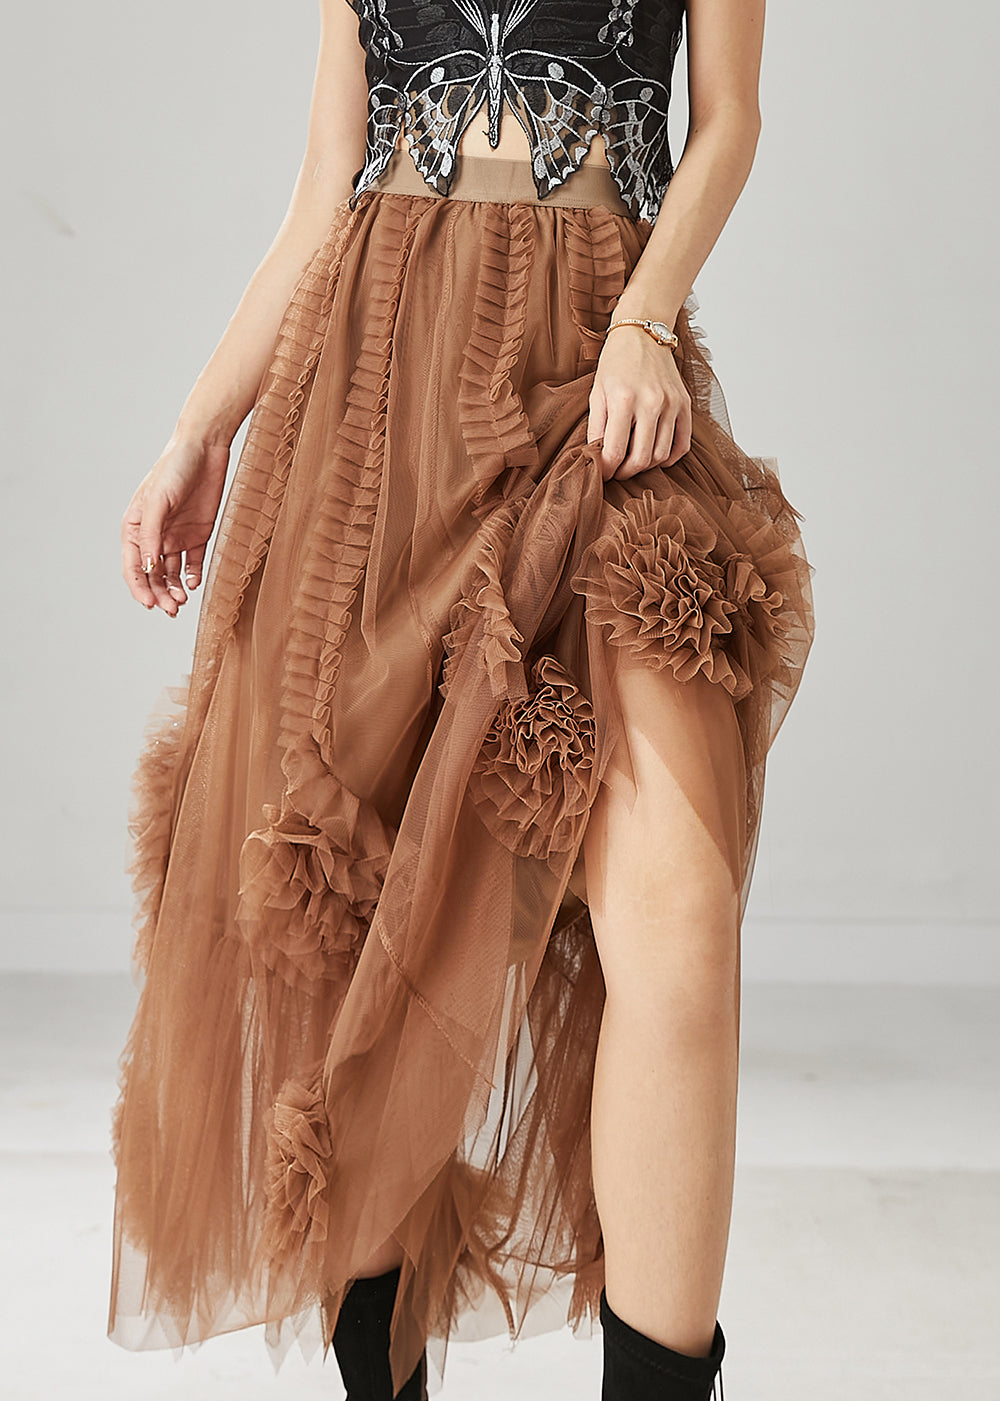 Classy Brown Ruffled Stereoscopic Floral Tulle Skirt Spring